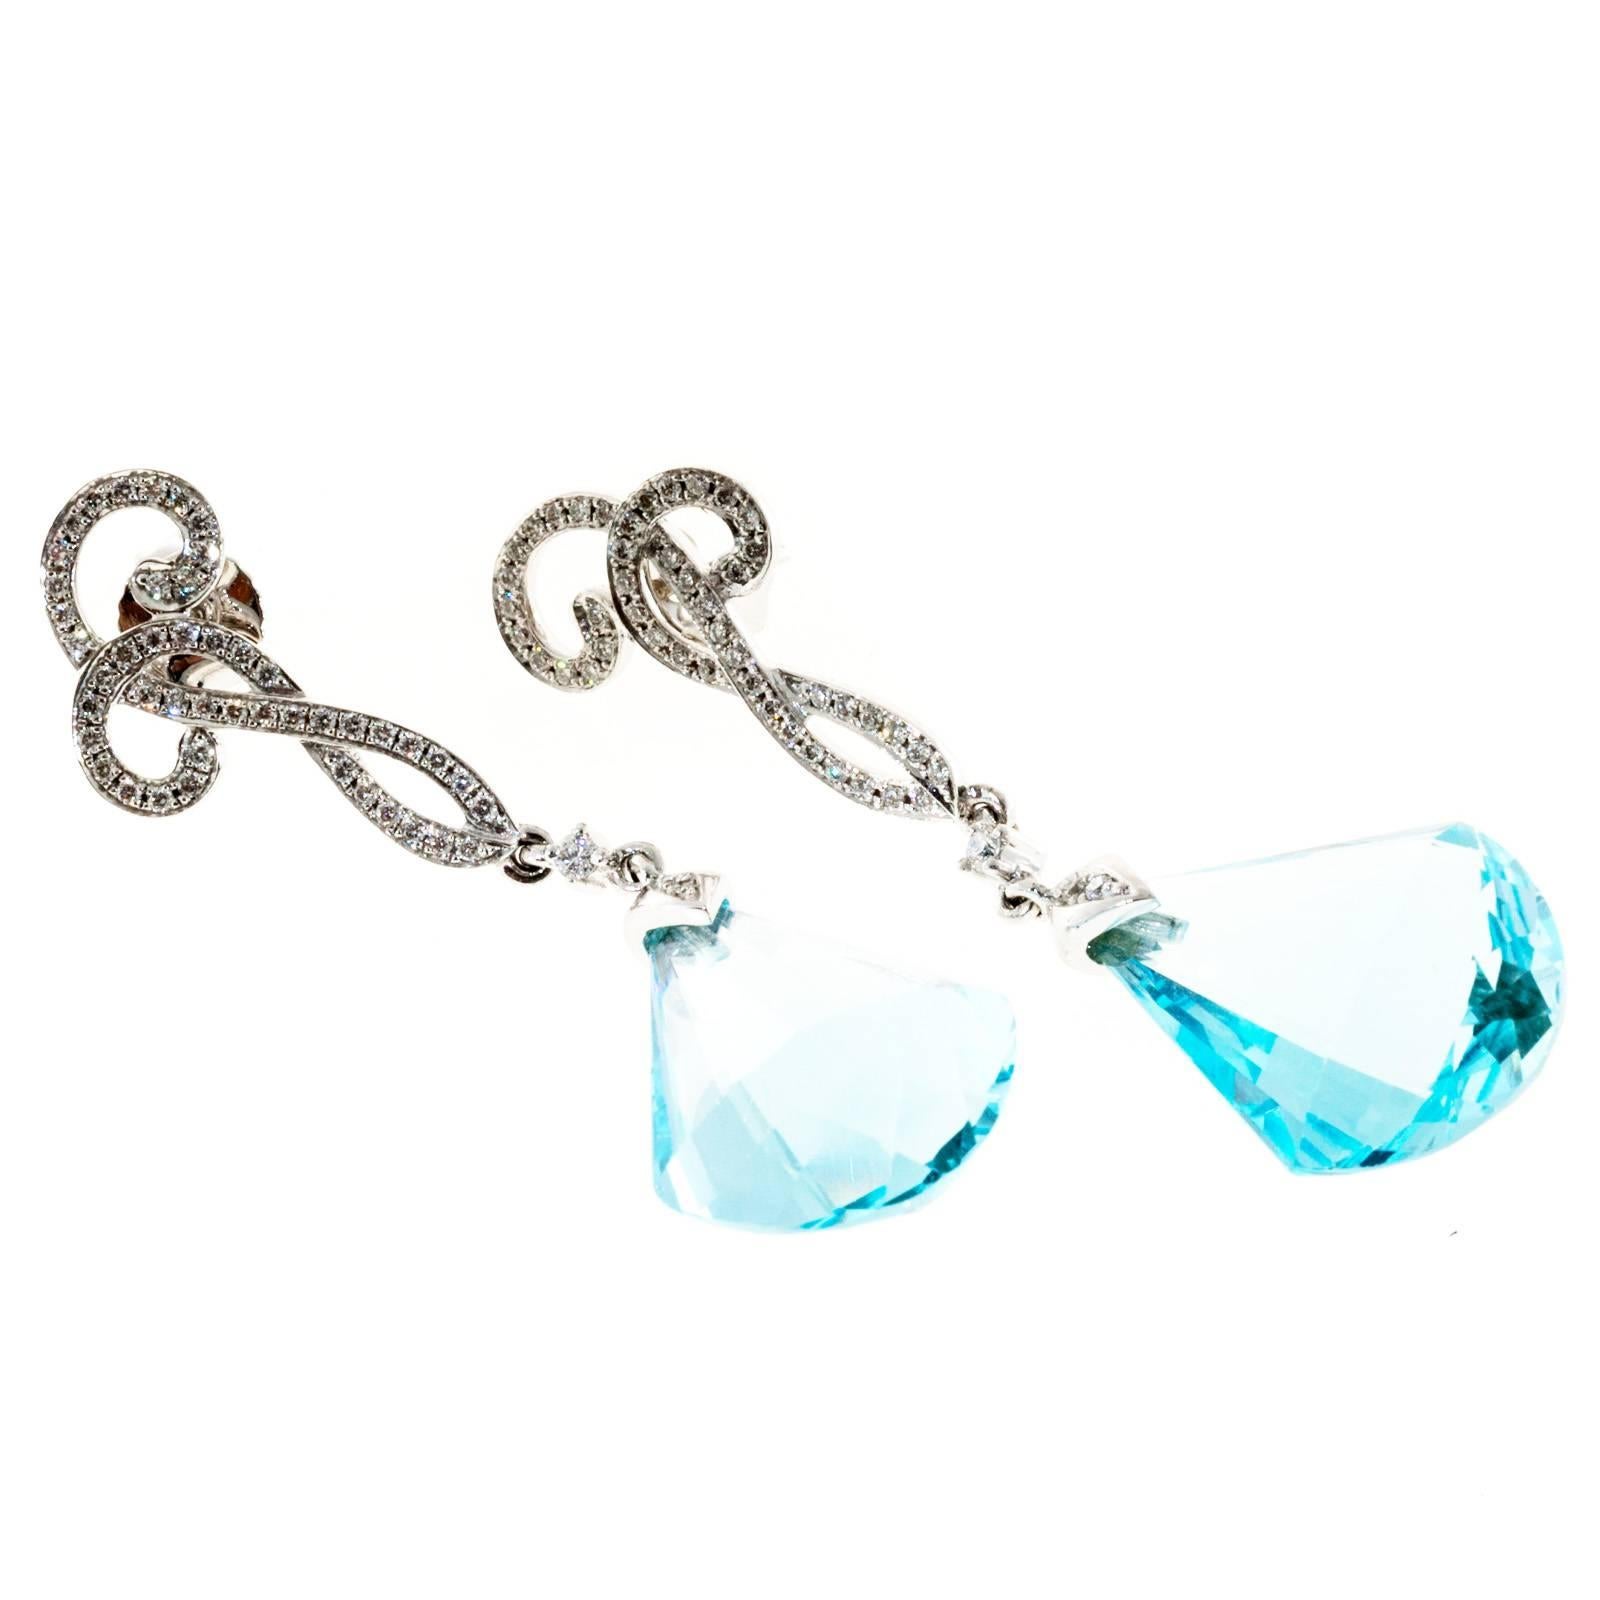 Cordova 14k white gold diamond dangle earrings with blue Topaz.

2 fancy blue Topaz, 18.57 x 13.21 x 7.01mm
92 round diamonds, approx. total weight .33cts
18k white gold
Tested and stamped: 18k
Hallmark: Cordova
7.6 grams
Top to bottom: